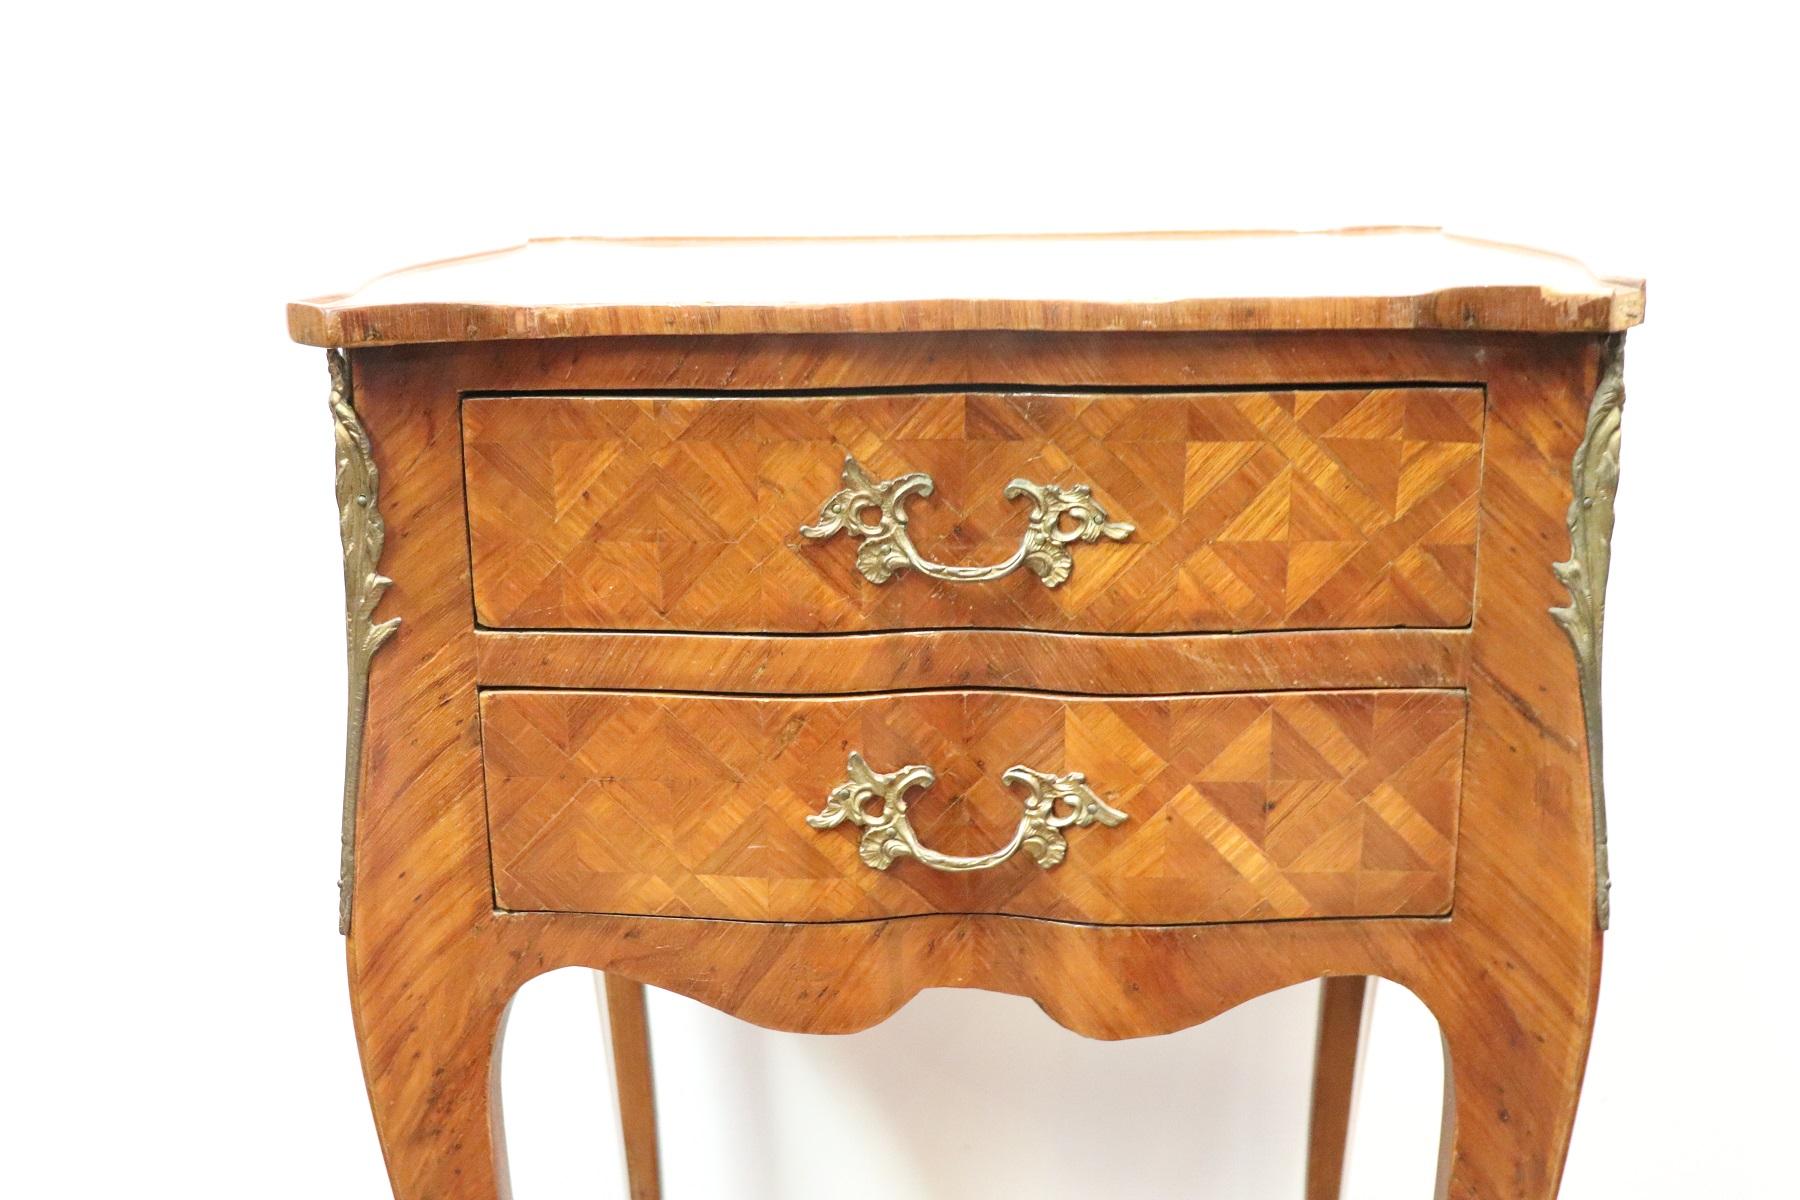 20th Century Italian Louis XV Style Marquetry Wood Side Table or Nightstand (Louis XV.)